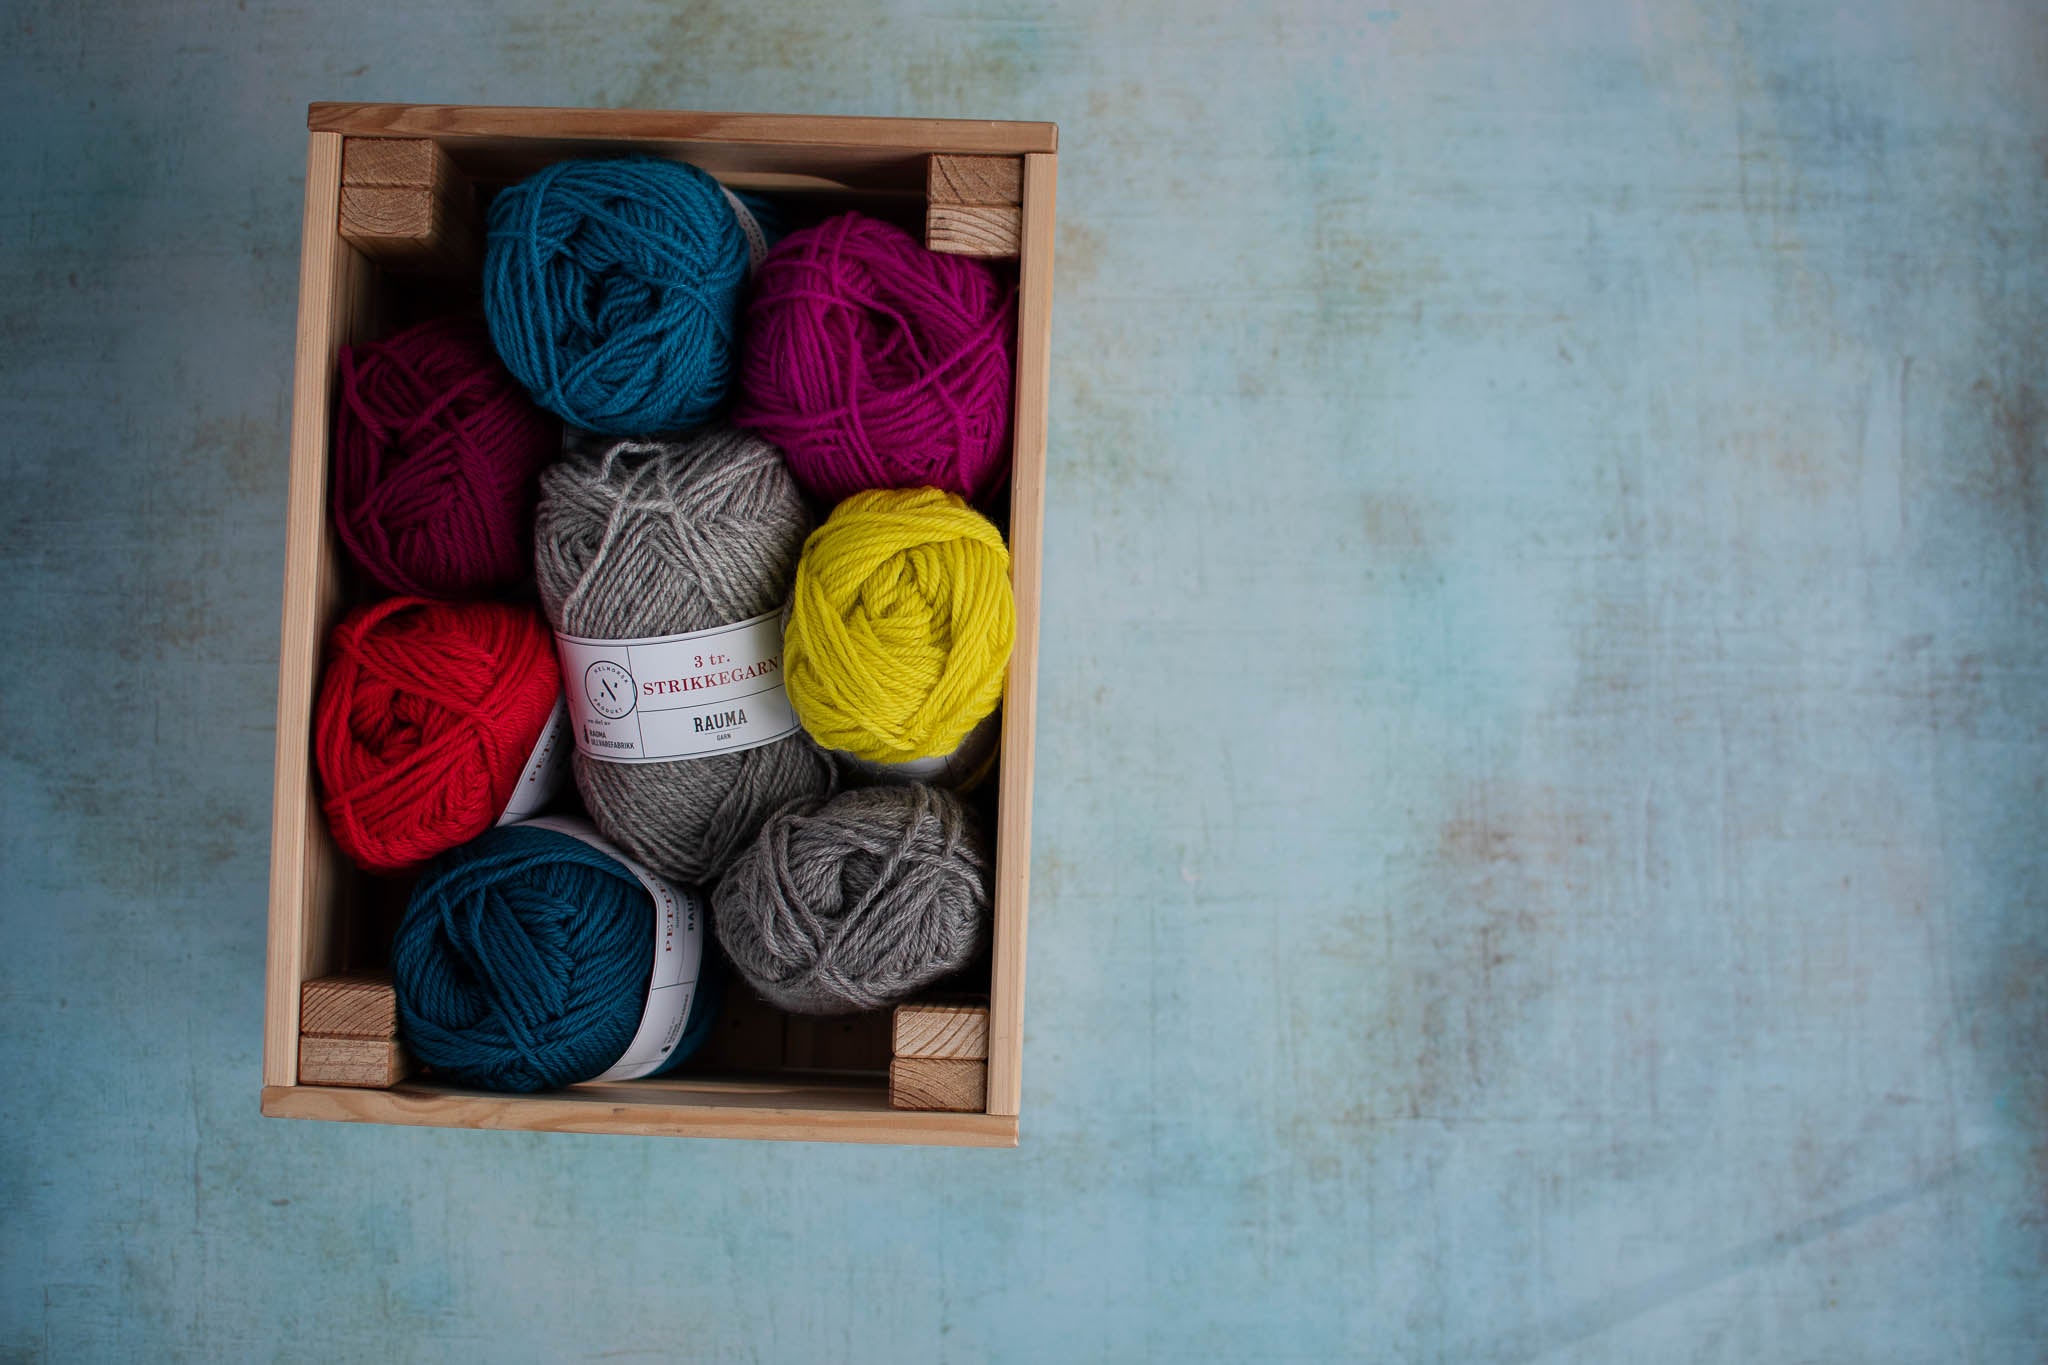 A small wooden box holds balls of yarn in a variety of colours. The box is placed to the left of the image.